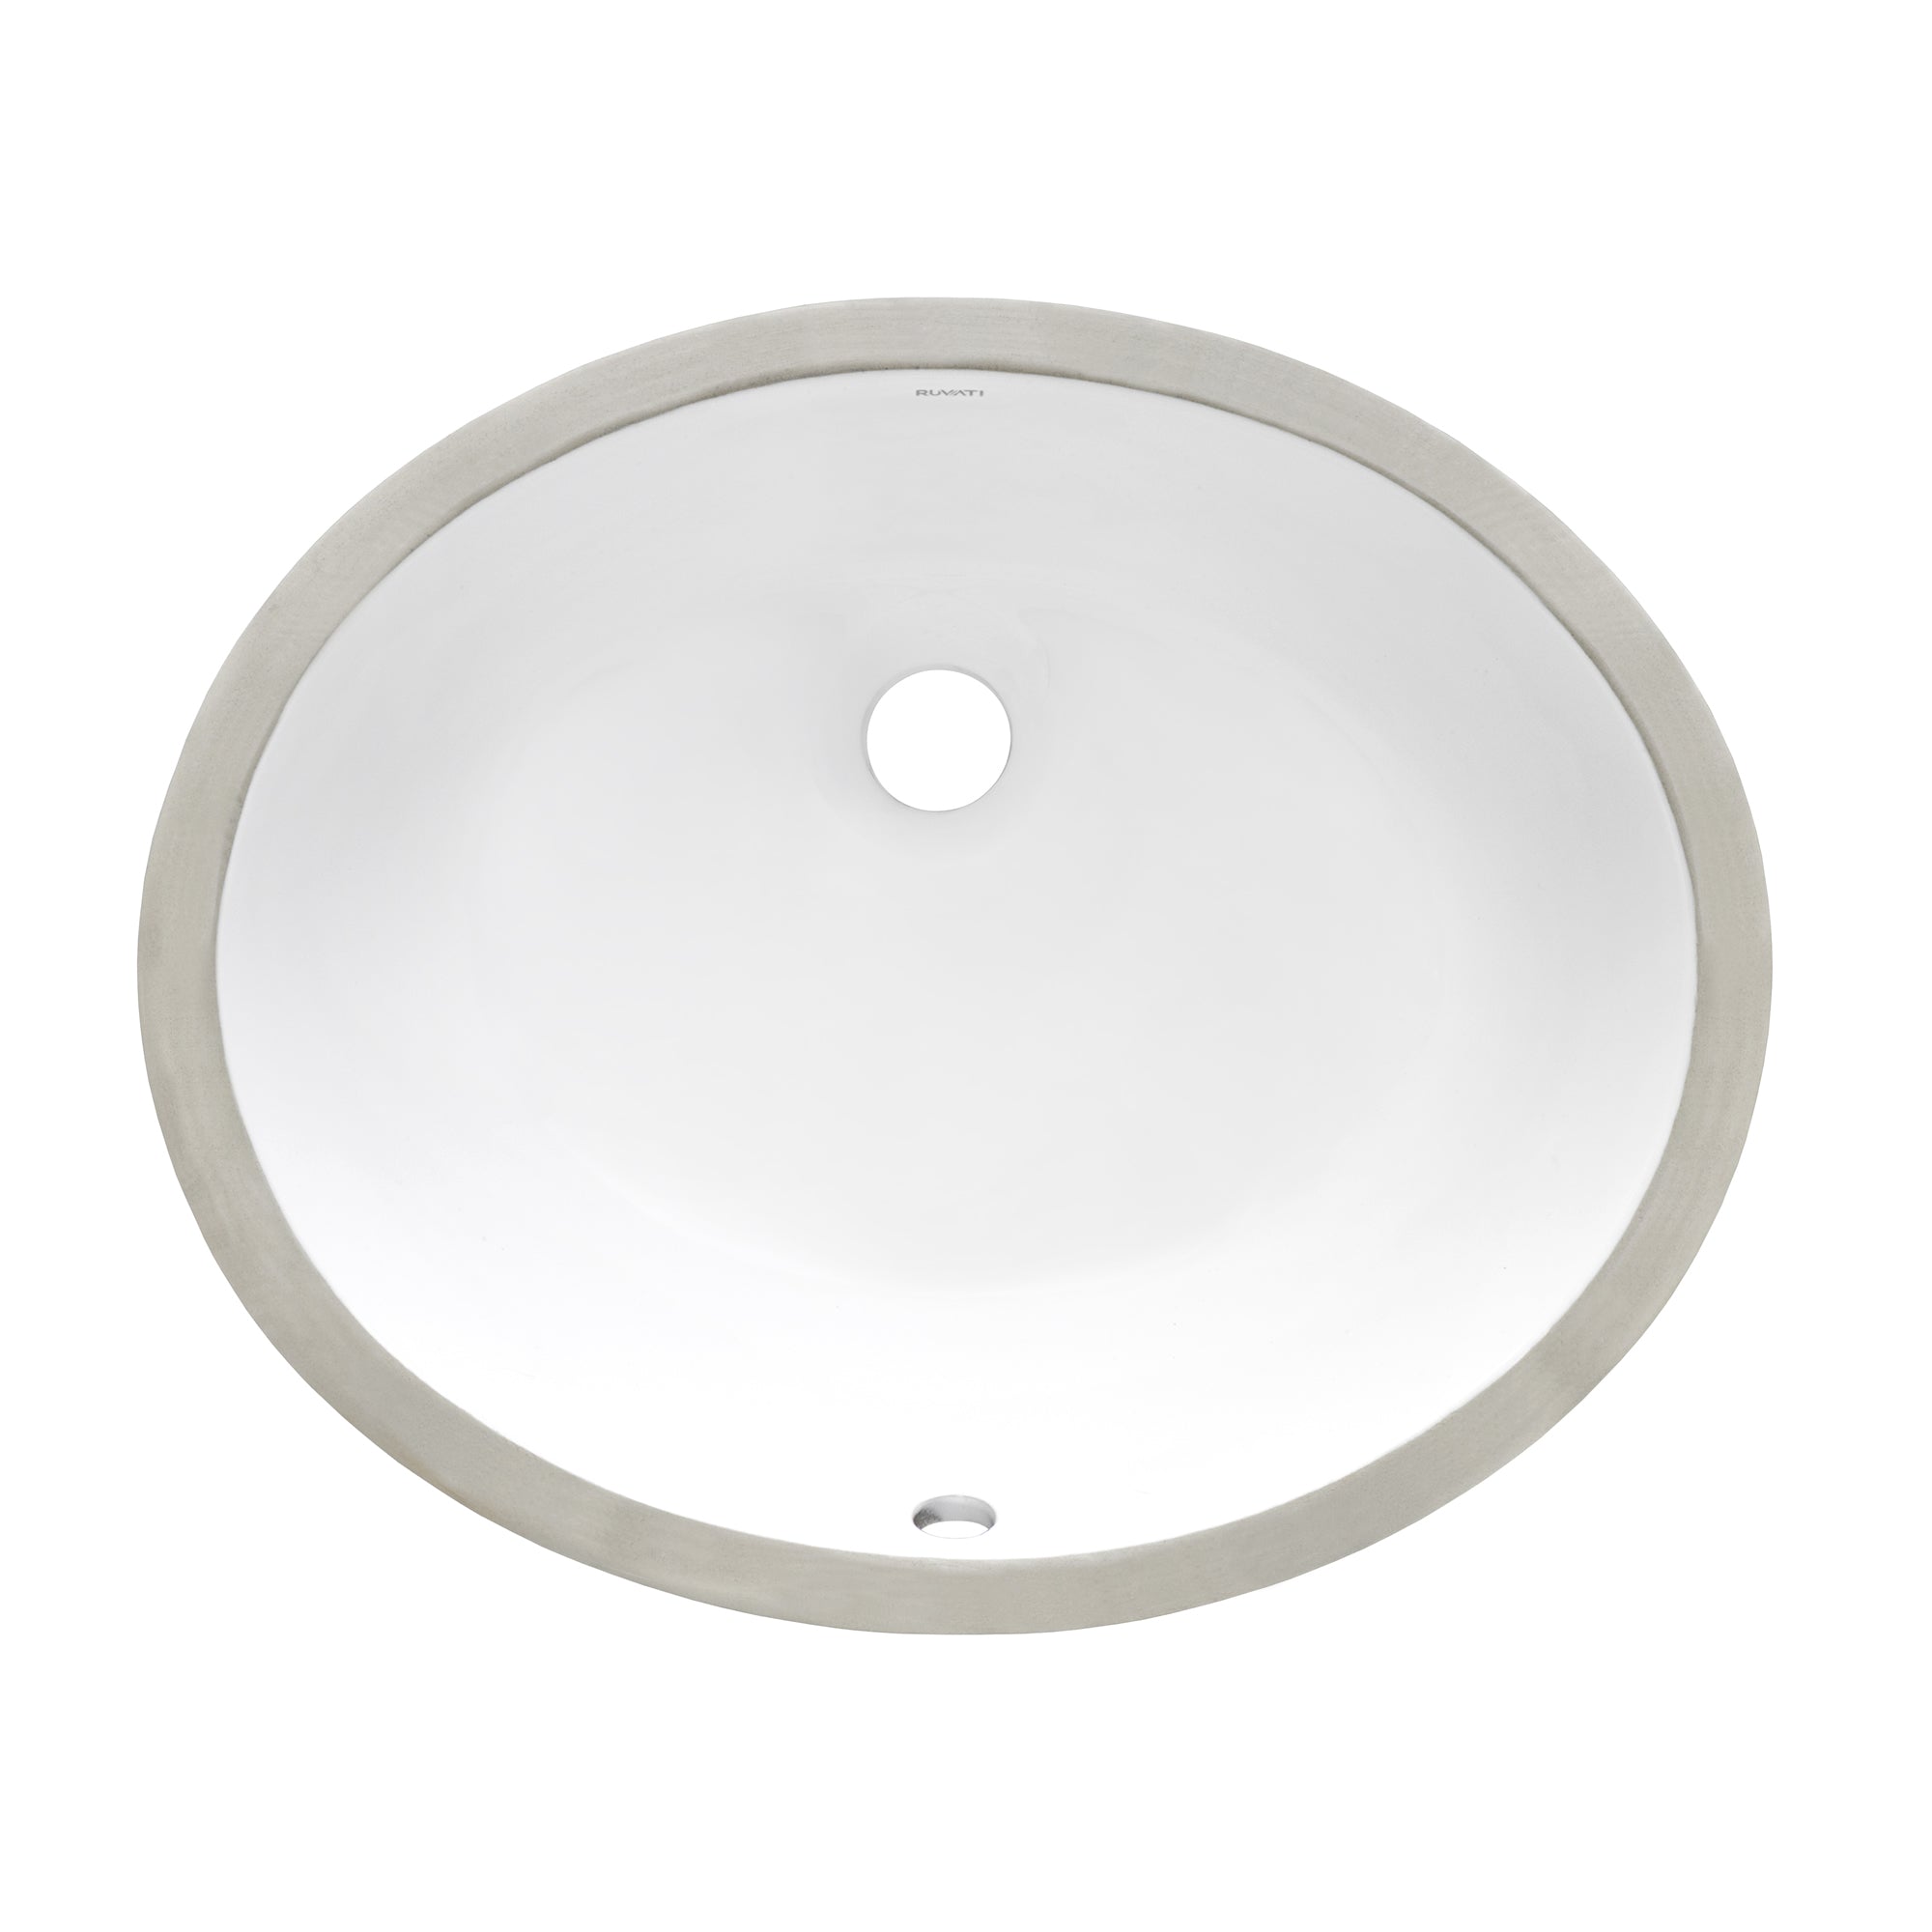 19 x 16 inch Undermount Bathroom Vanity Sink White Oval Porcelain Ceramic with Overflow